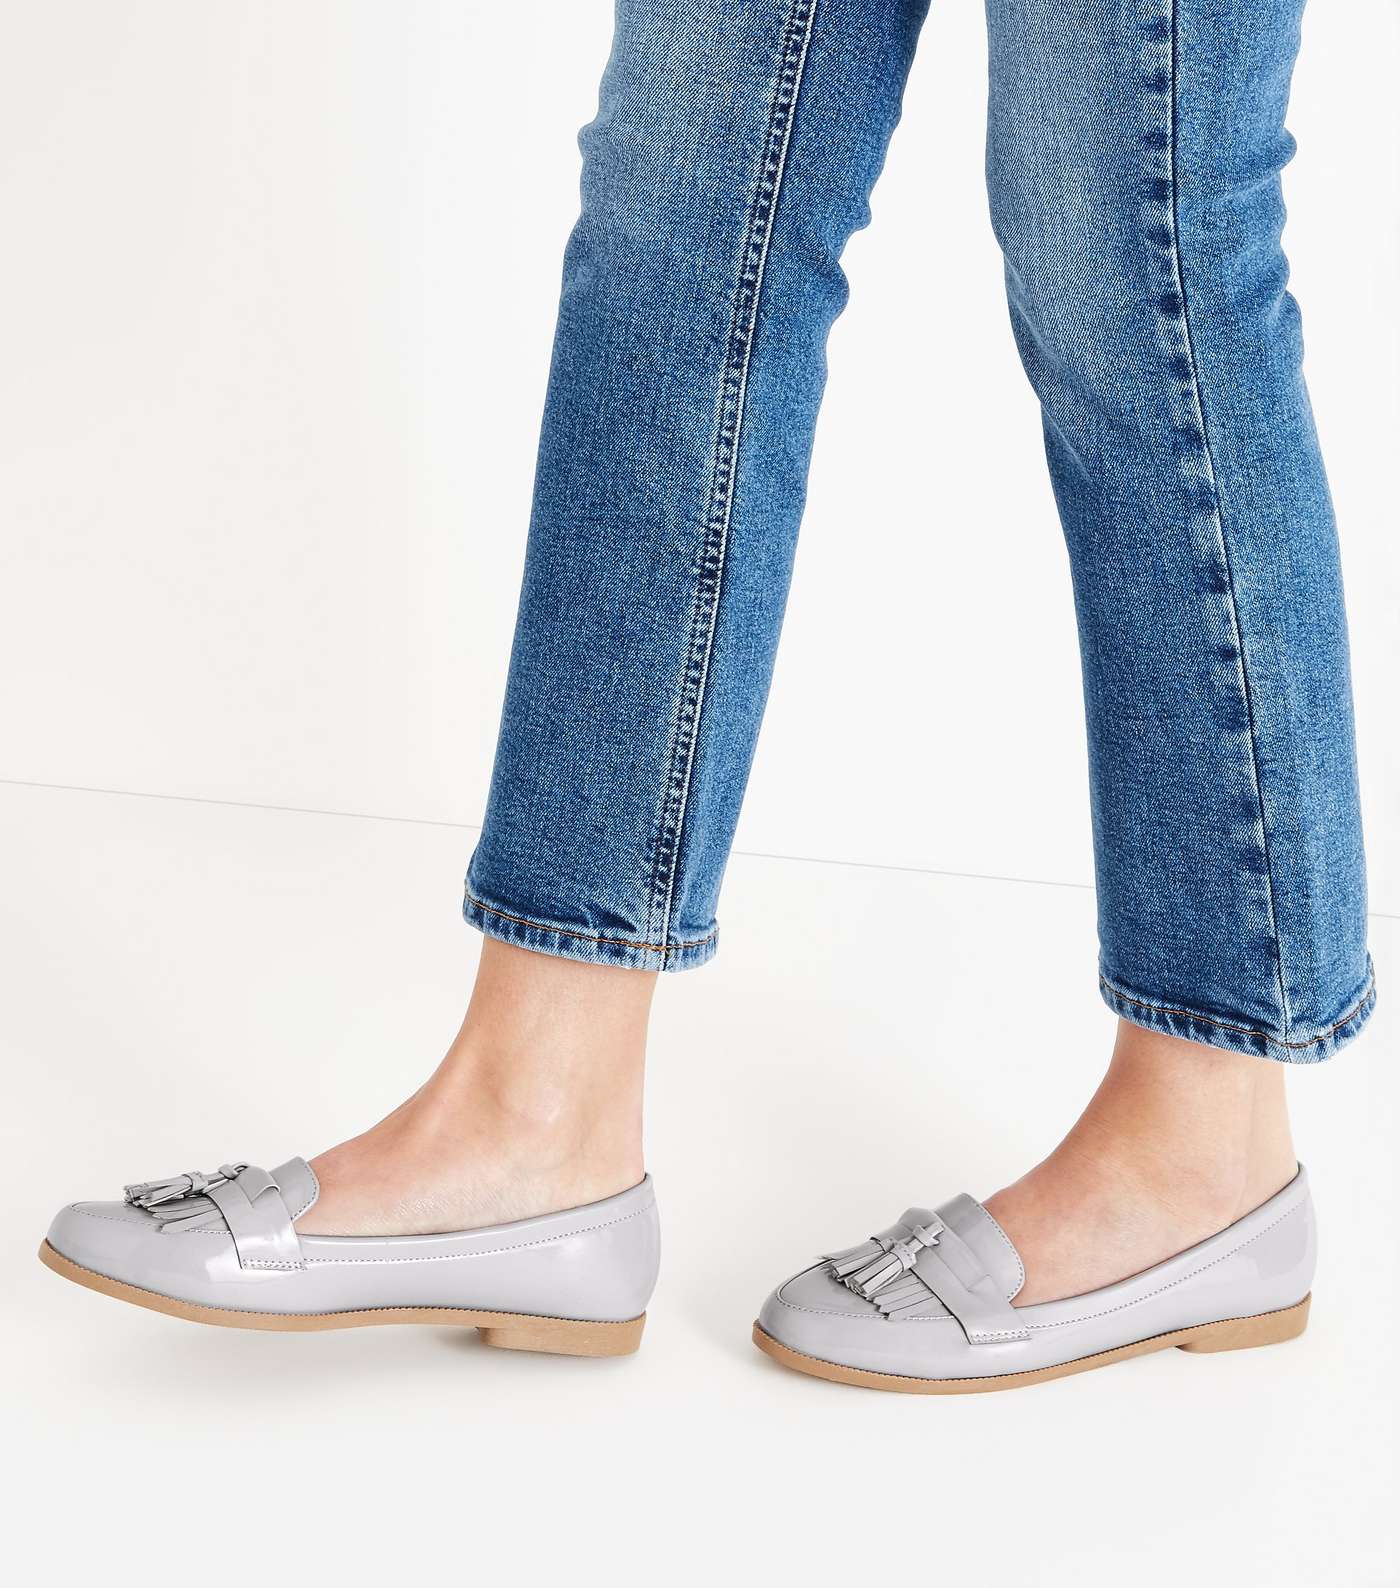 Grey Patent Fringe Front Loafers Image 2